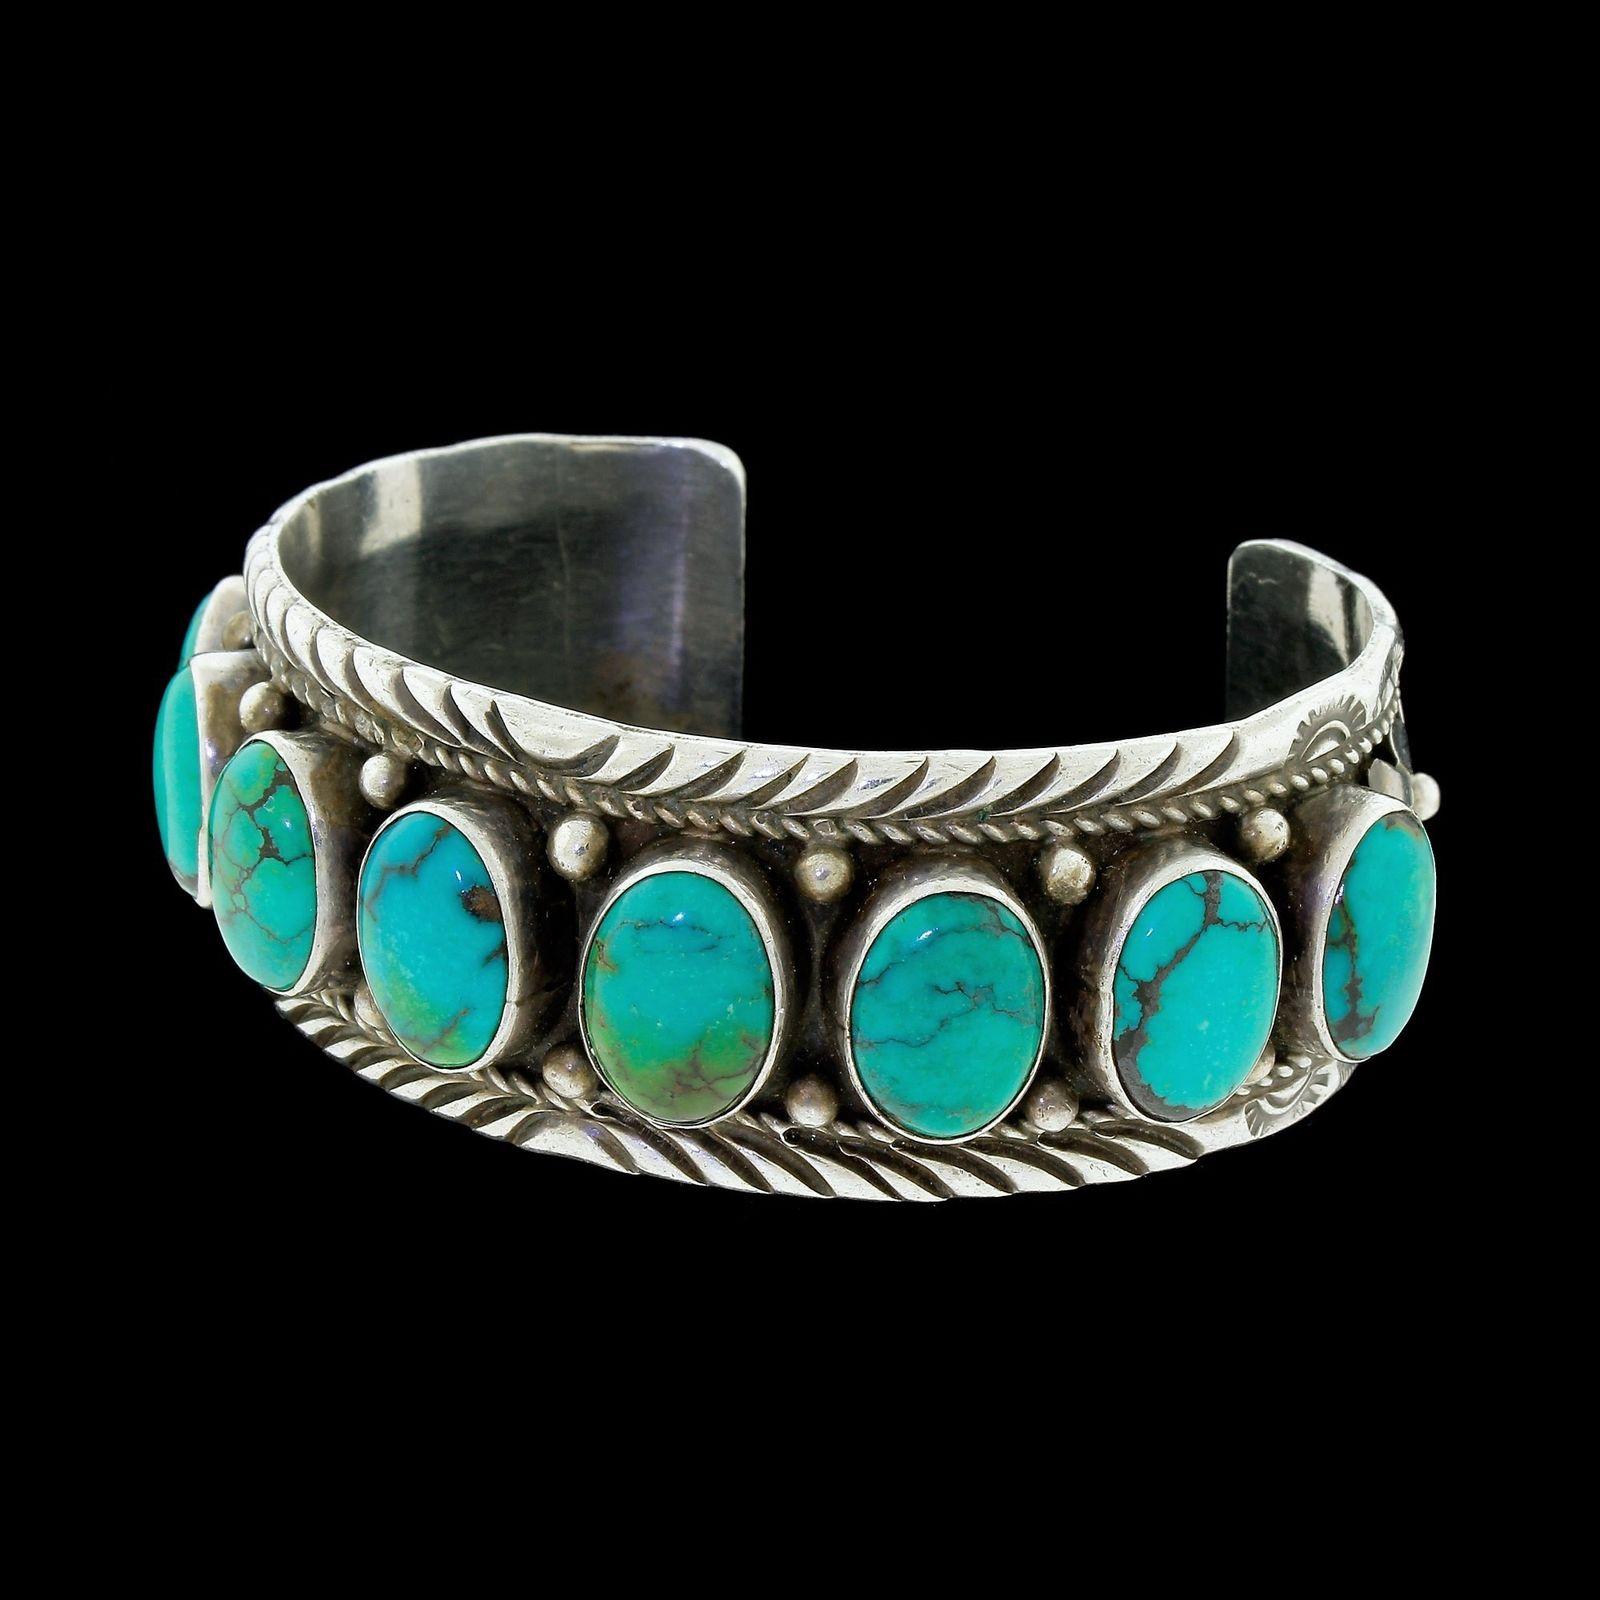 Details & Condition: Vintage signed sterling silver cuff bracelet by Russell Sam in excellent vintage condition.
All eight of the turquoise stones are original and in excellent condition, no chips cracks or replacements, all decorations are original